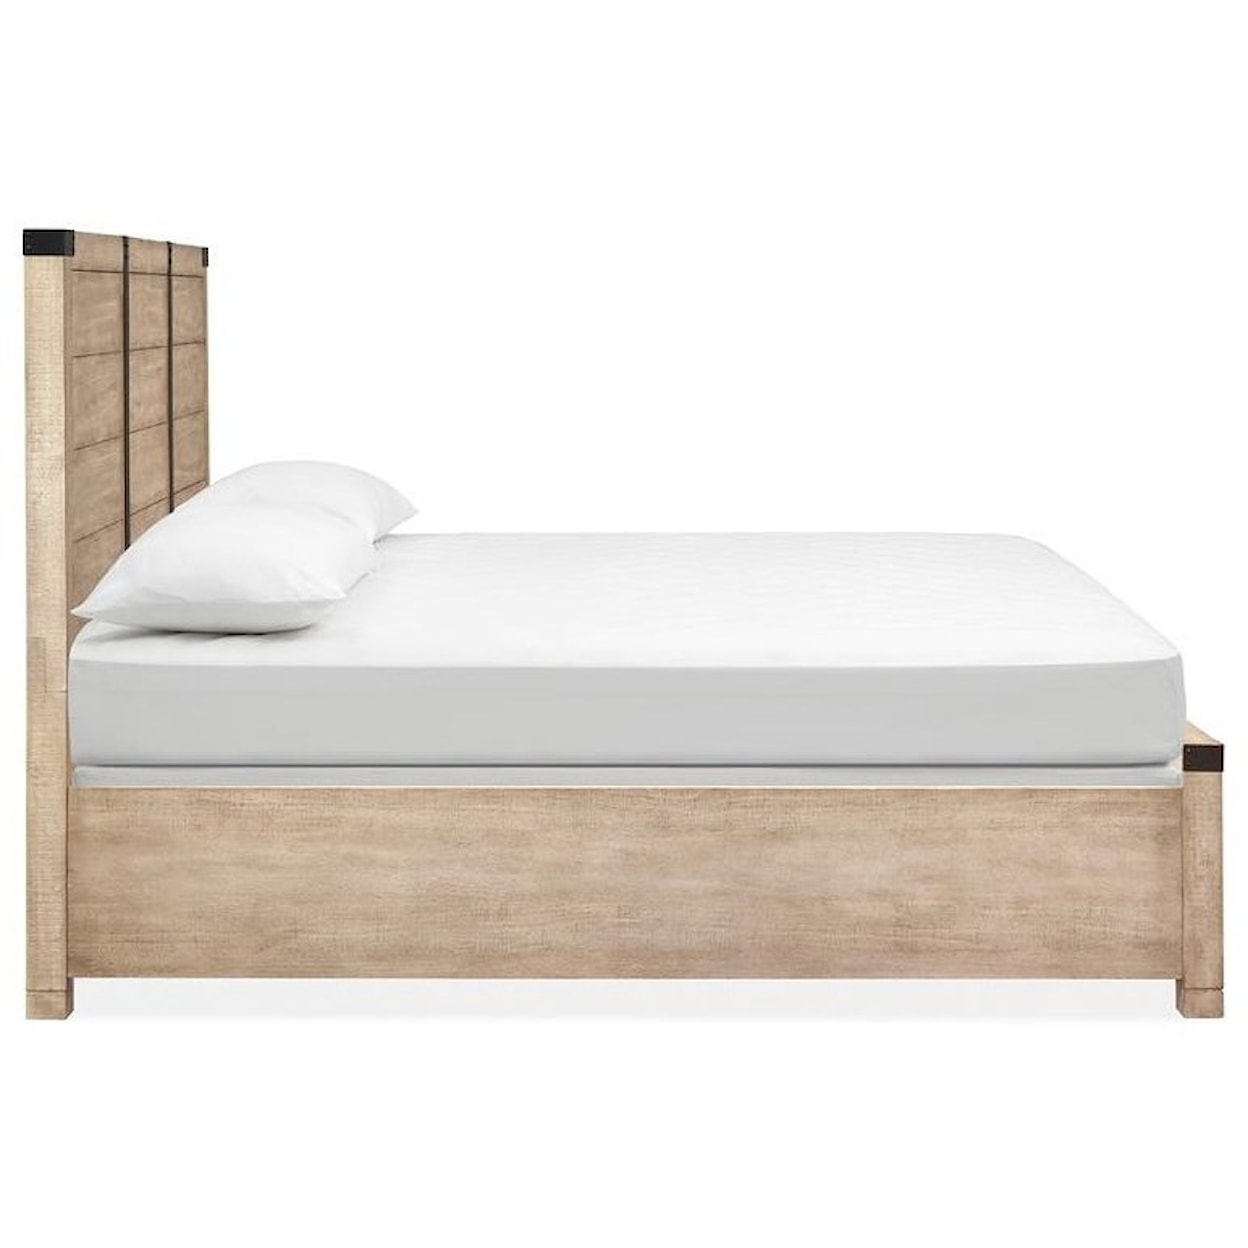 Magnussen Home Radcliffe Bedroom California King Low Profile Bed